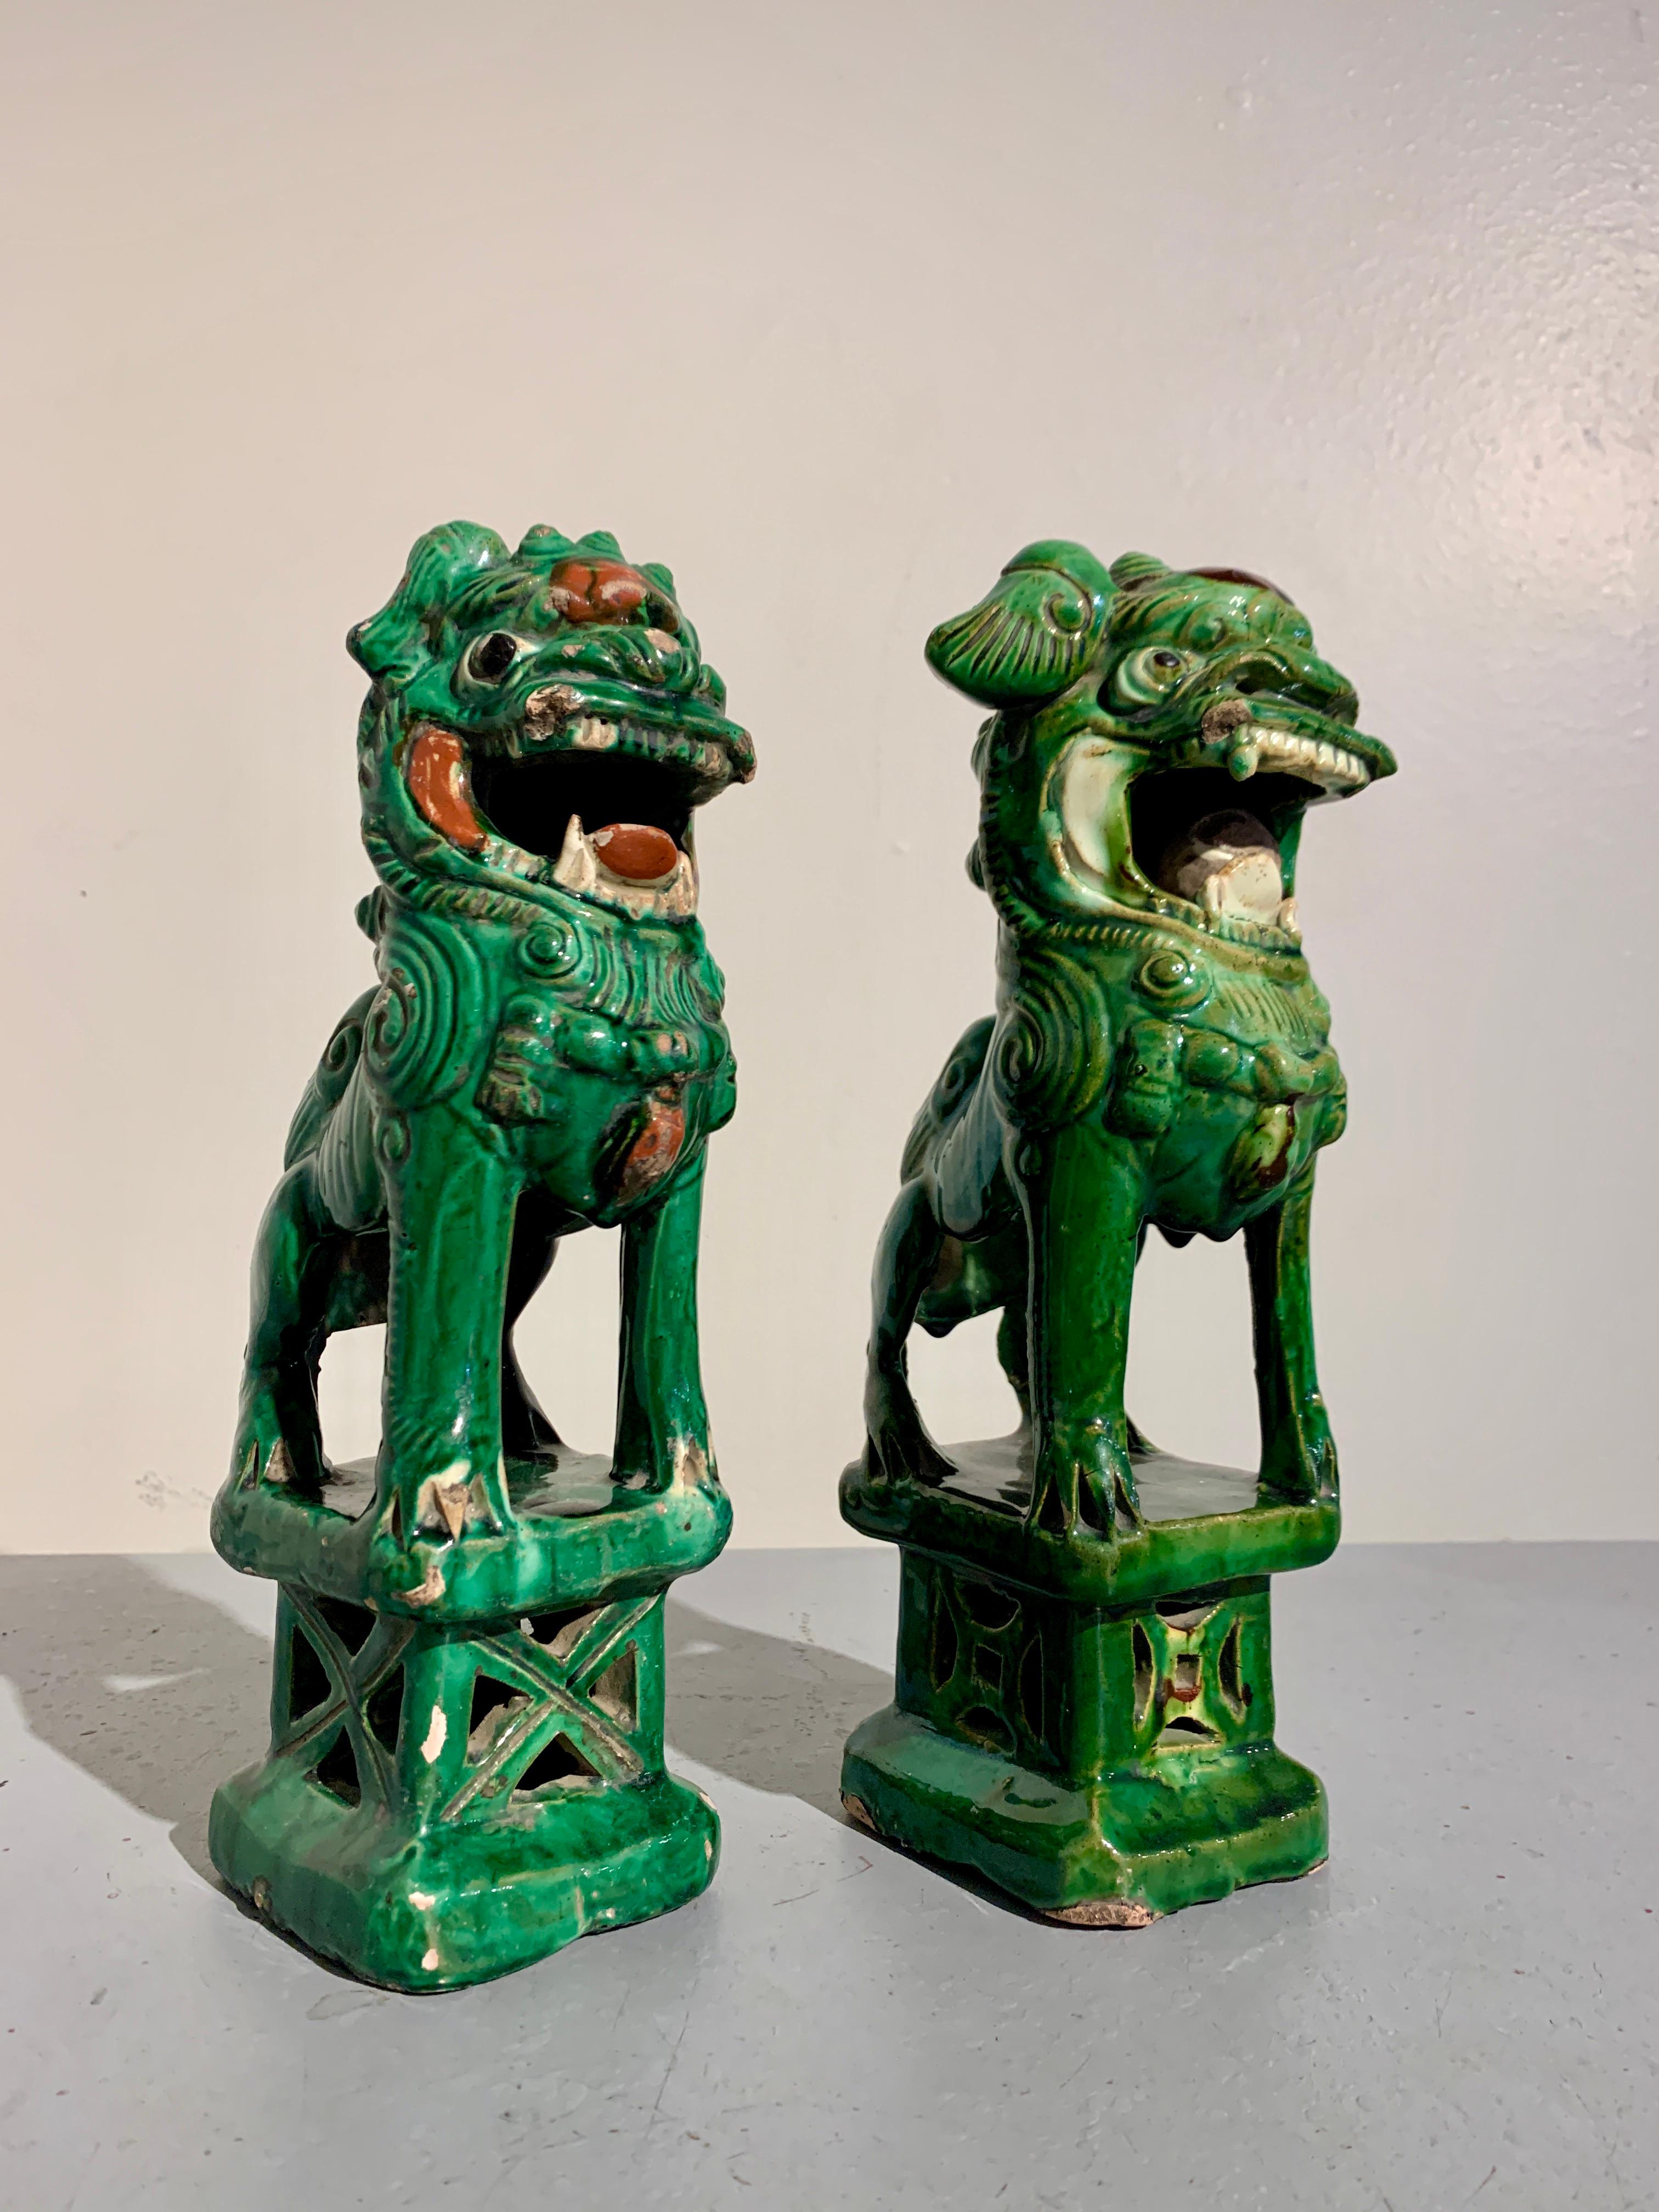 A charming near pair of Chinese green glazed foo lion joss stick holders, late 19th century, China.

The delightful foo lions, also referred to as foo dogs, crafted as joss (incense) stick holders, with a small hole and quatrefoil ash catcher to